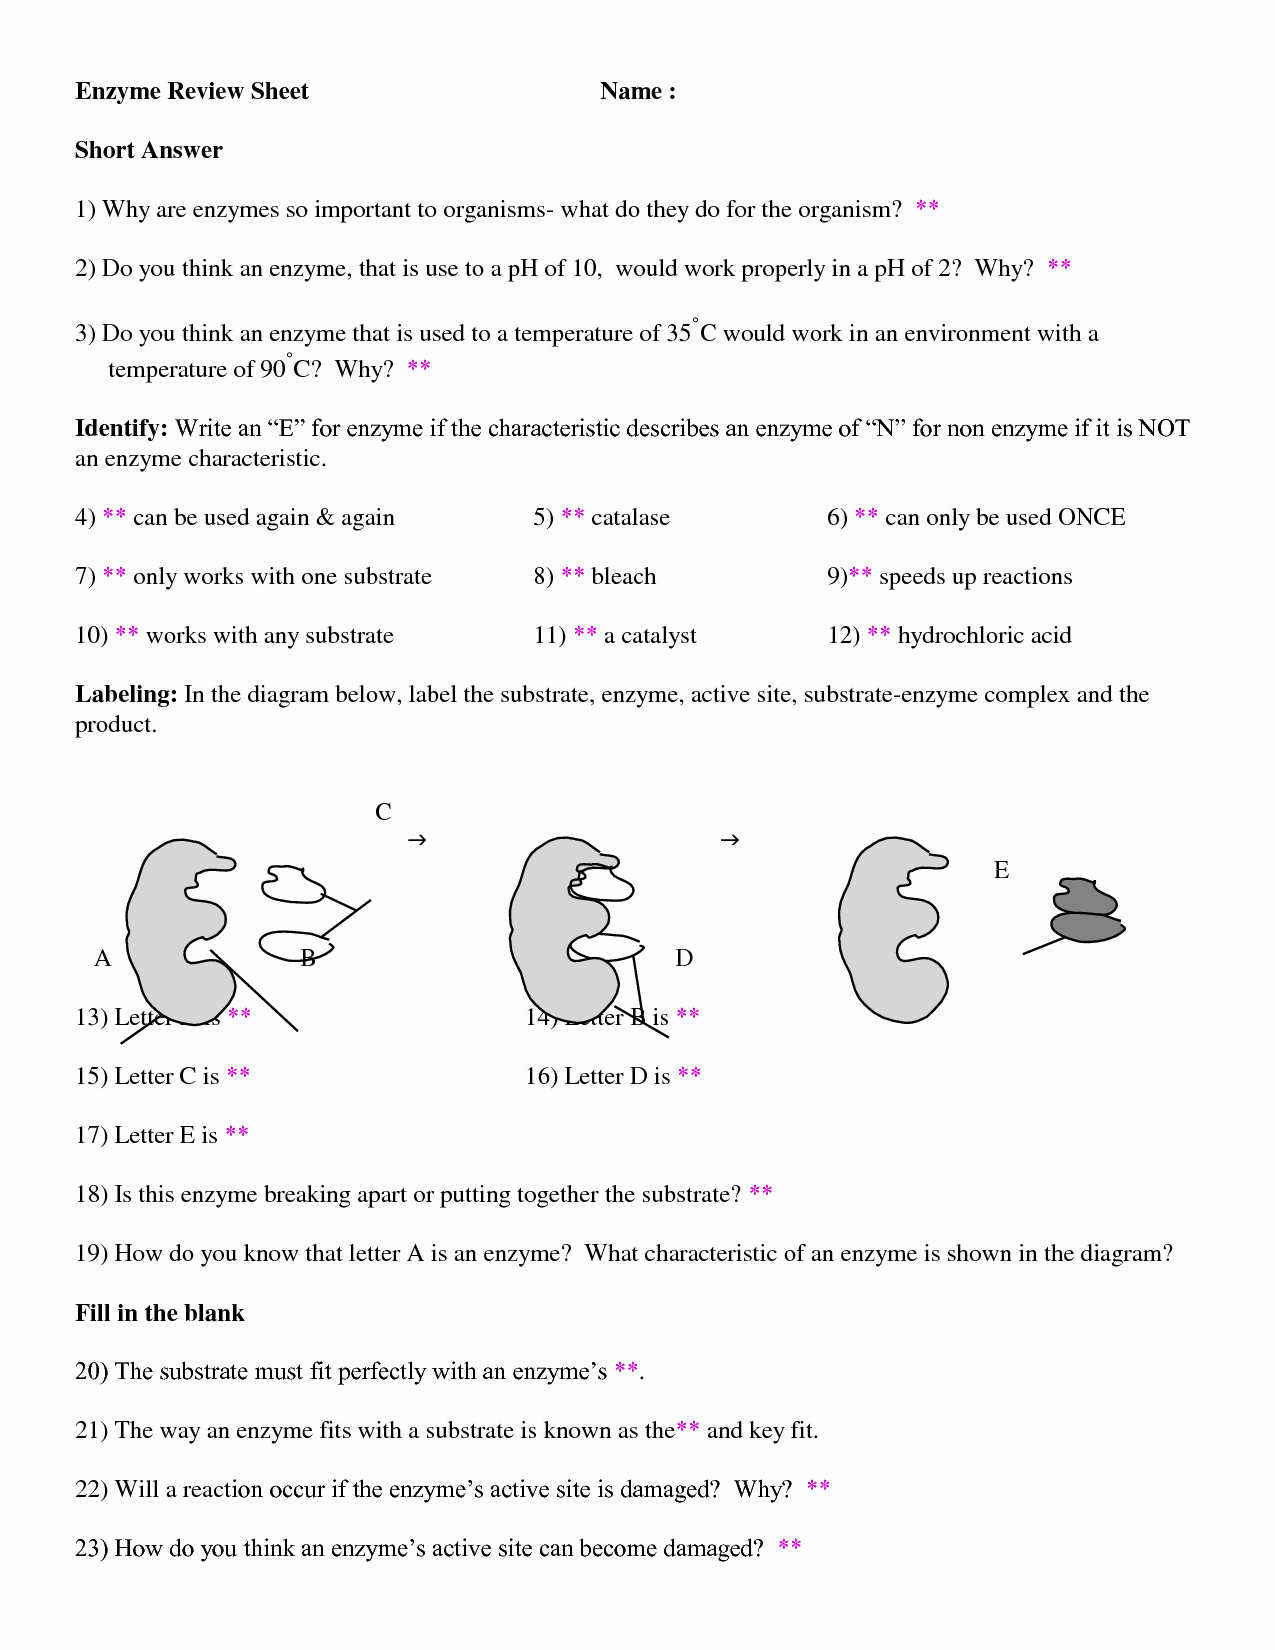 Enzyme Reactions Worksheet Answers Luxury Enzymes Worksheet Answers